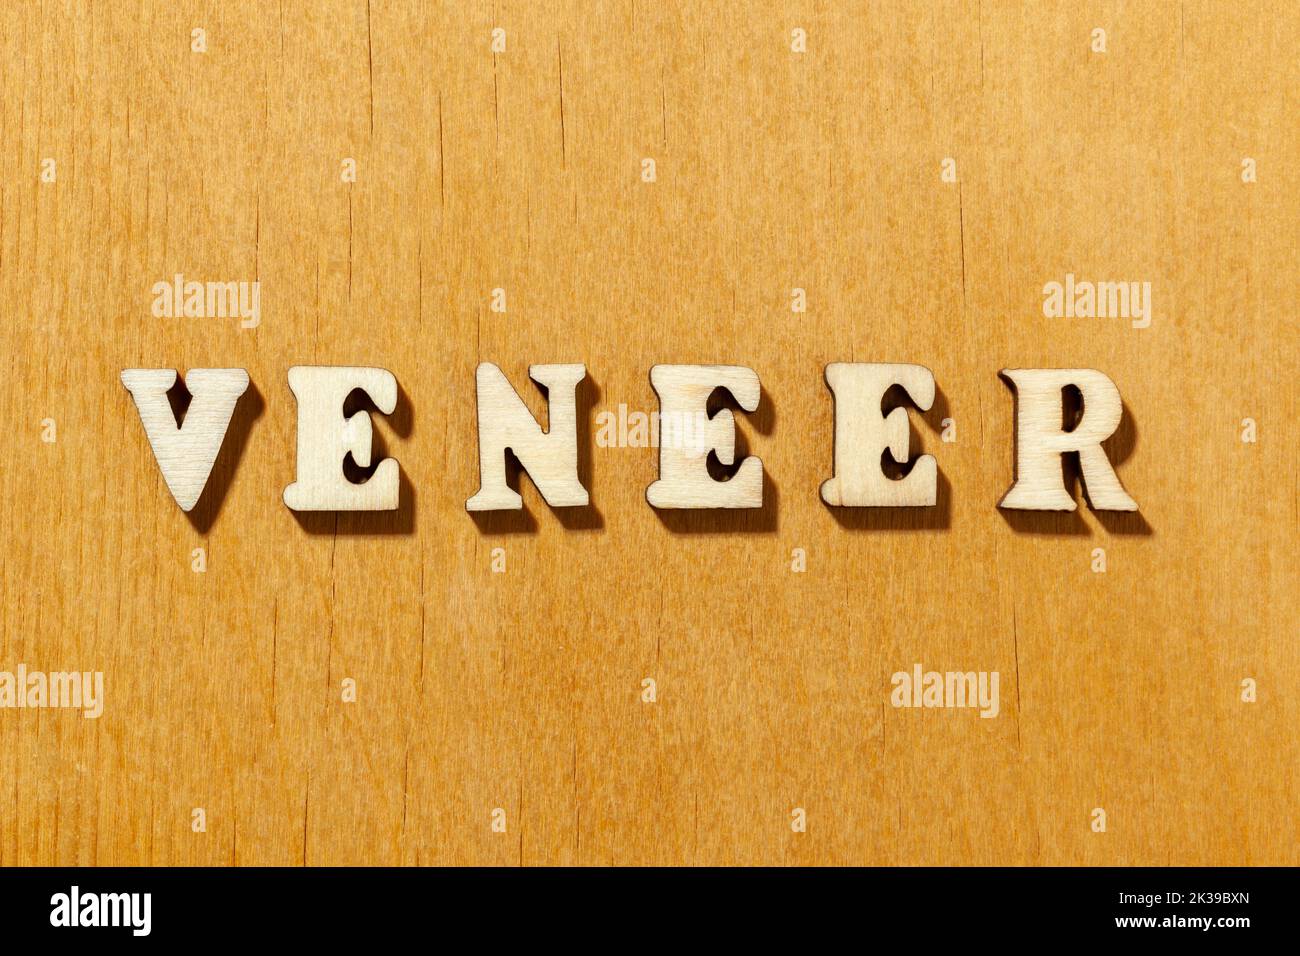 Word 'Veneer' by wooden letters close up Stock Photo